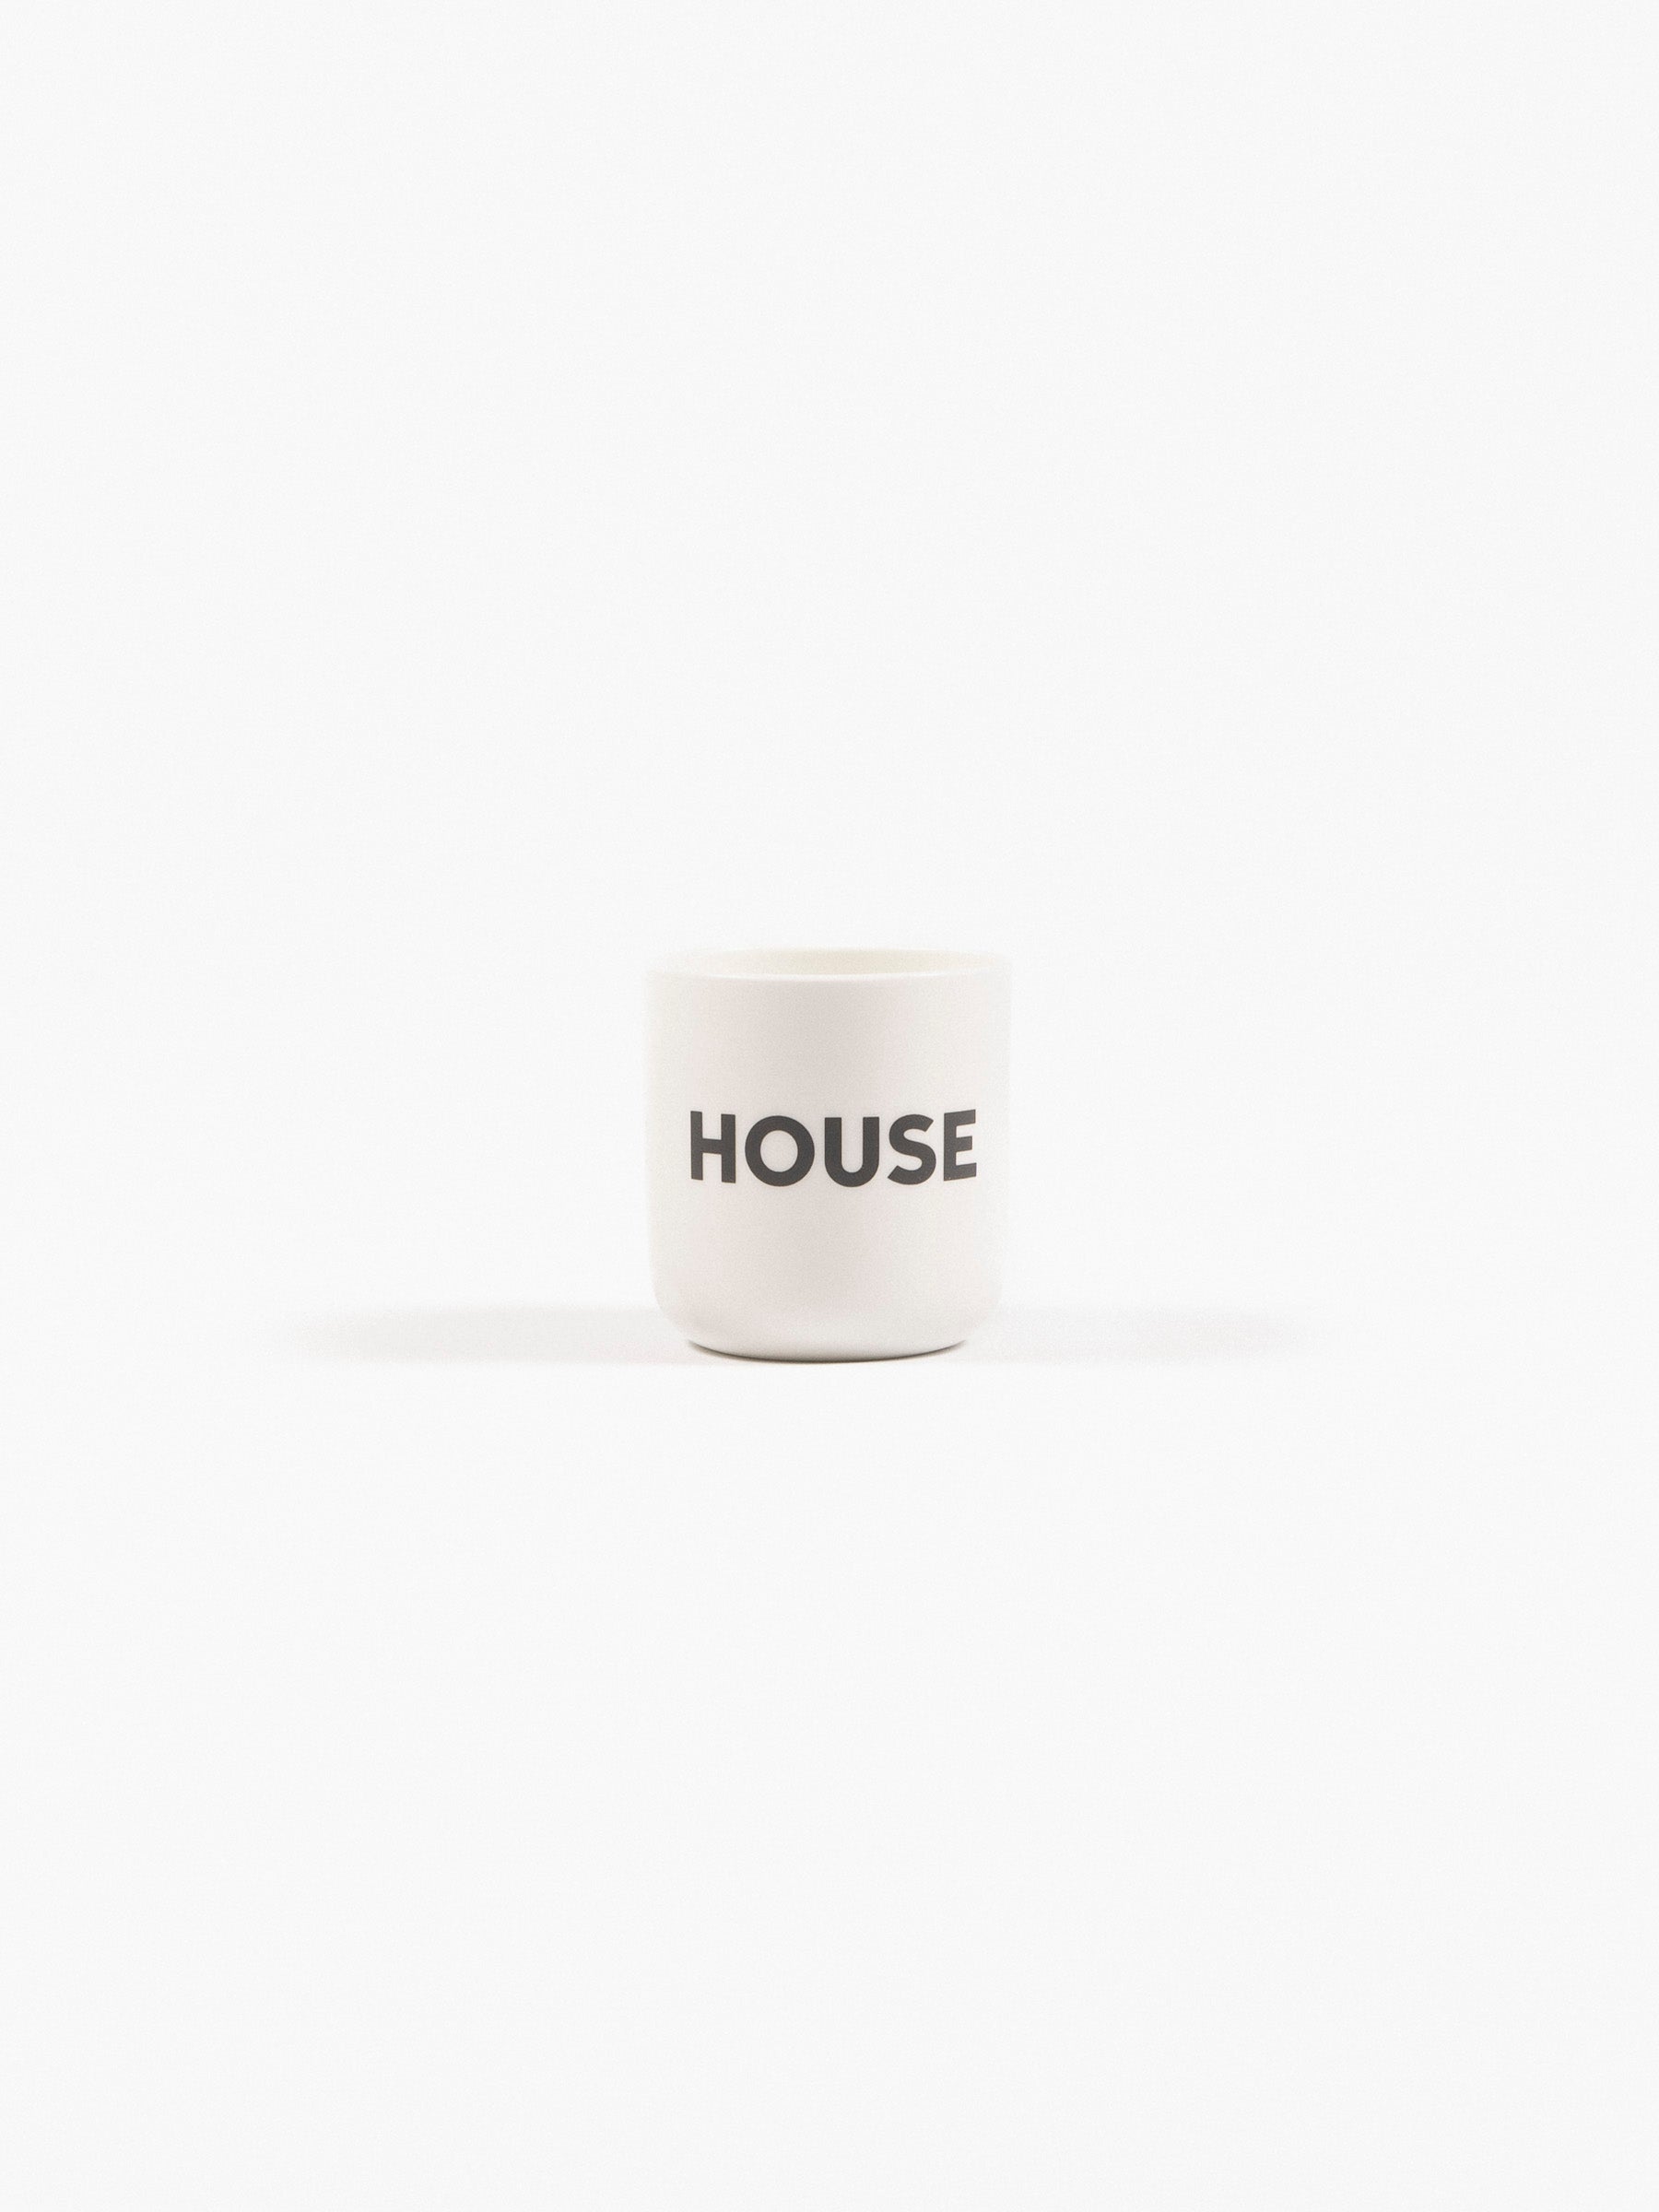 House Porcelain Cup White